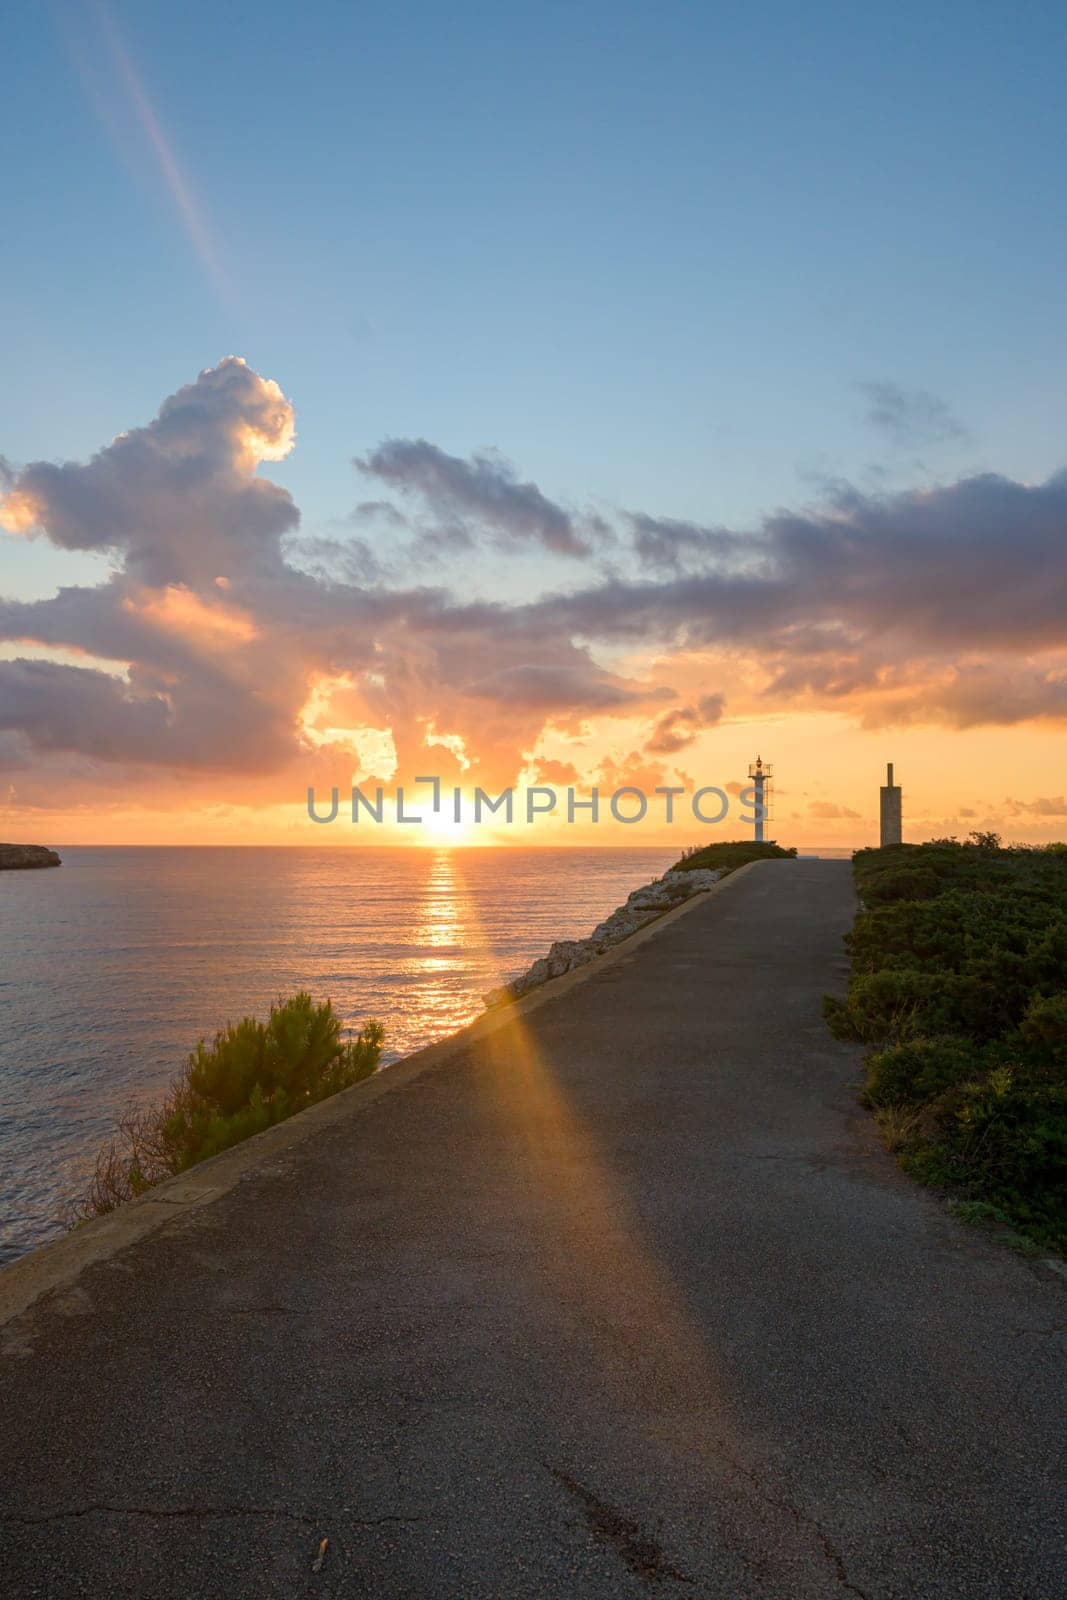 sunrise from the mediterranean sea in mallorca, on the way to the lighthouse by the cliffs,